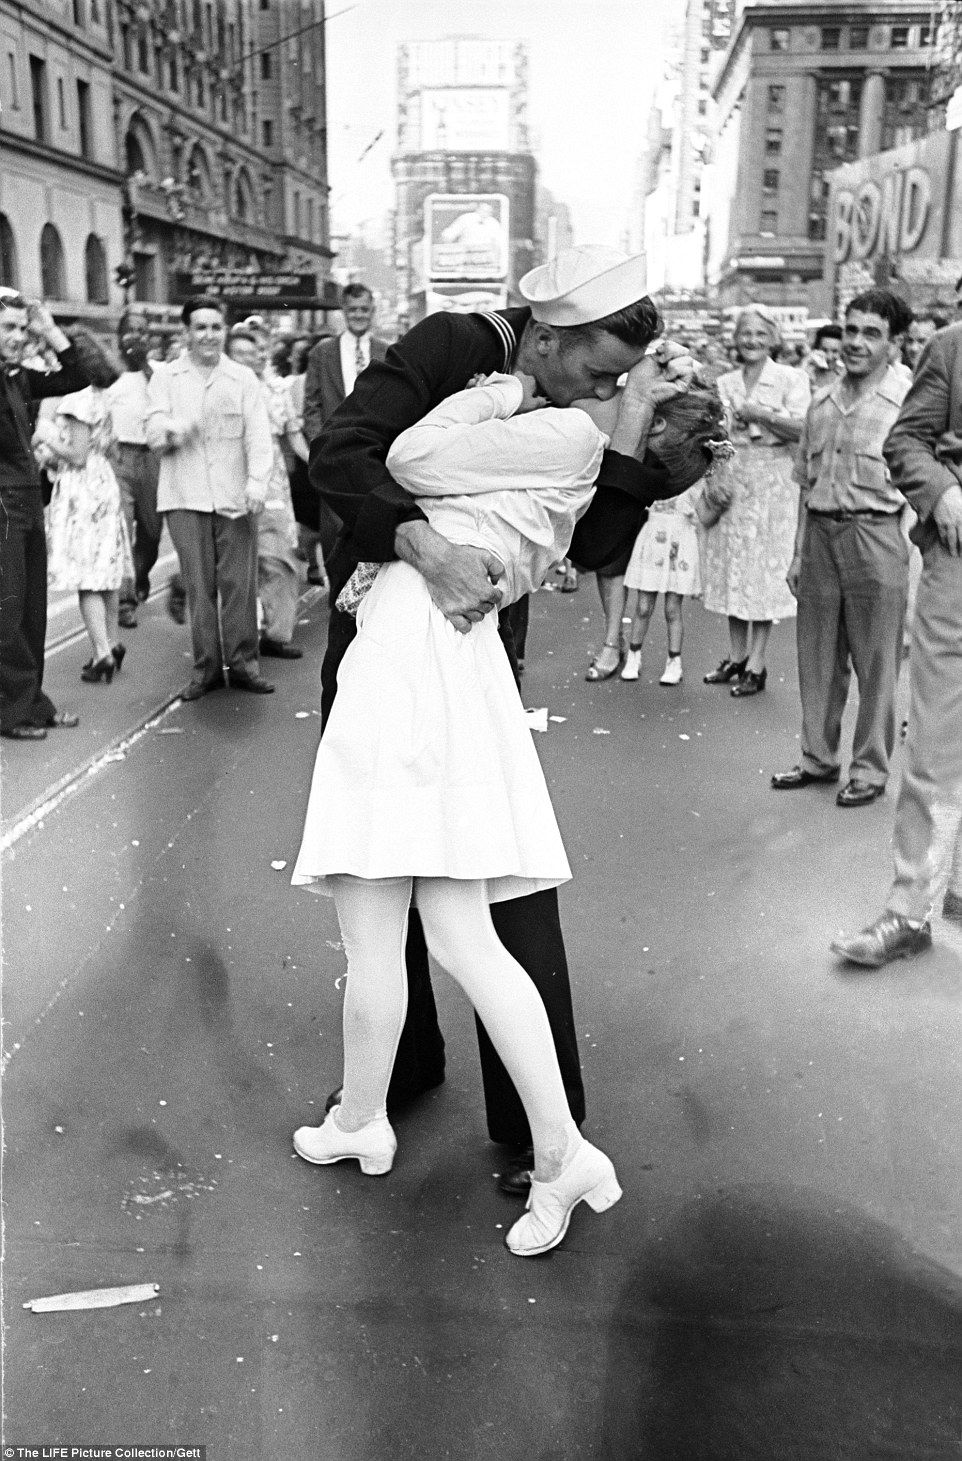 On August 14, 1945, as Japan surrendered at the end of the Second World War, celebrations broke out in New York City’s Times Square. And famously, during the VJ (Victory over Japan) Day celebrations, a sailor and a woman embraced in a passionate kiss. Mystery surrounds the subjects in the photo, taken by photographer Alfred Eisenstaedt. Over the past 70 years, dozens of men and women have claimed to be the pair caught in the clinch